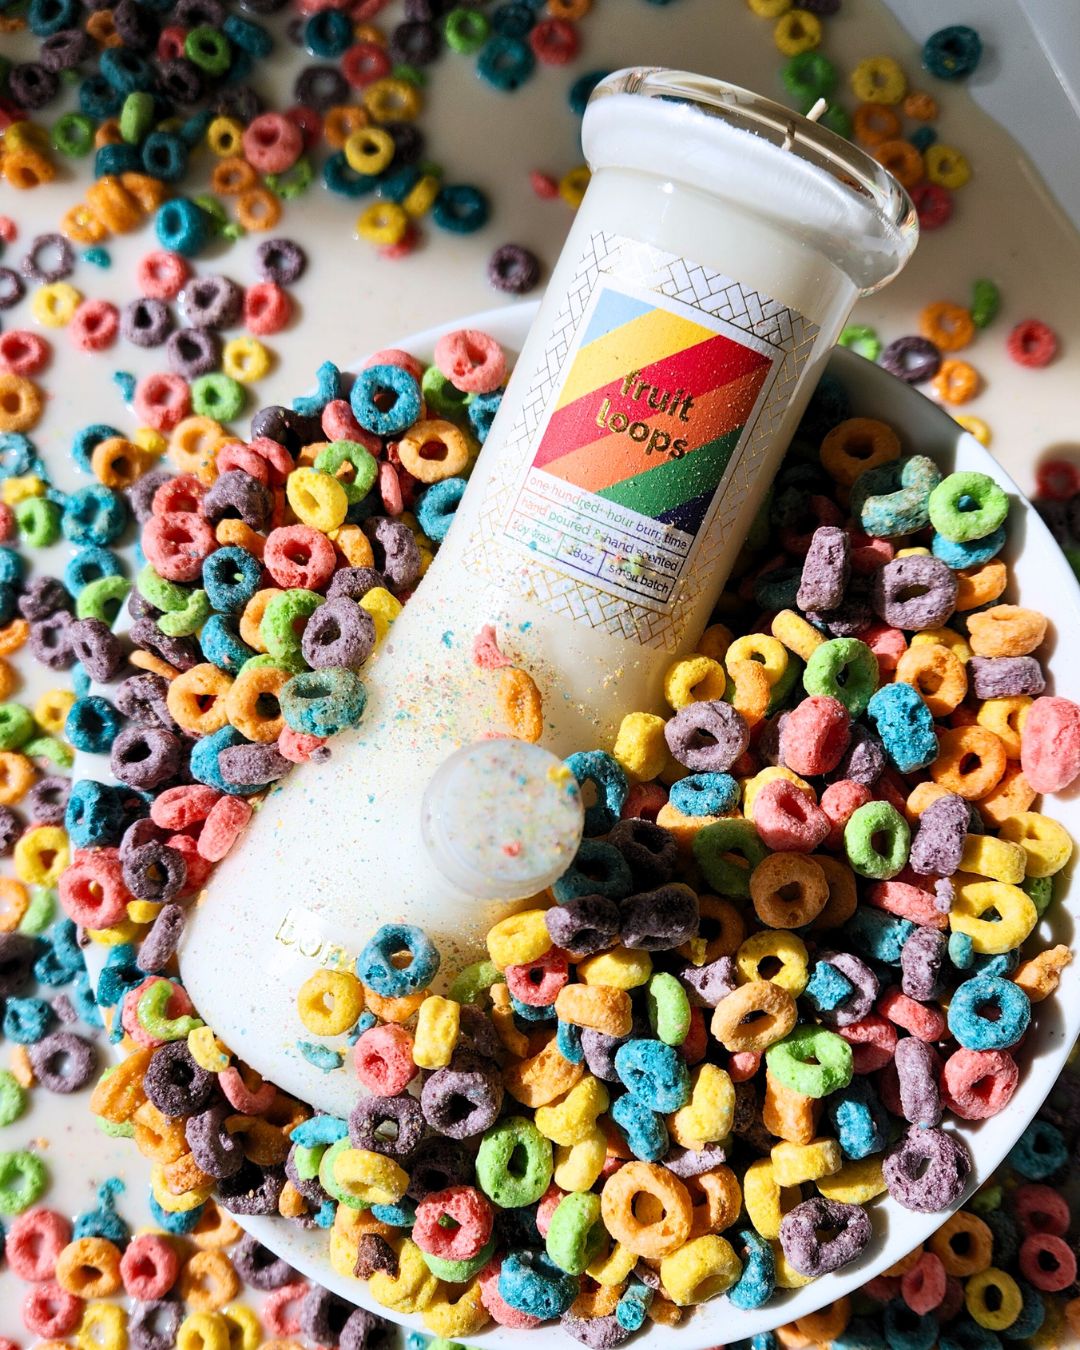 fruit loops candle, cereal scented candle, toucan sam, fruit loops, unique gift idea, trendy candle gift, gay pride, lgbtq candle